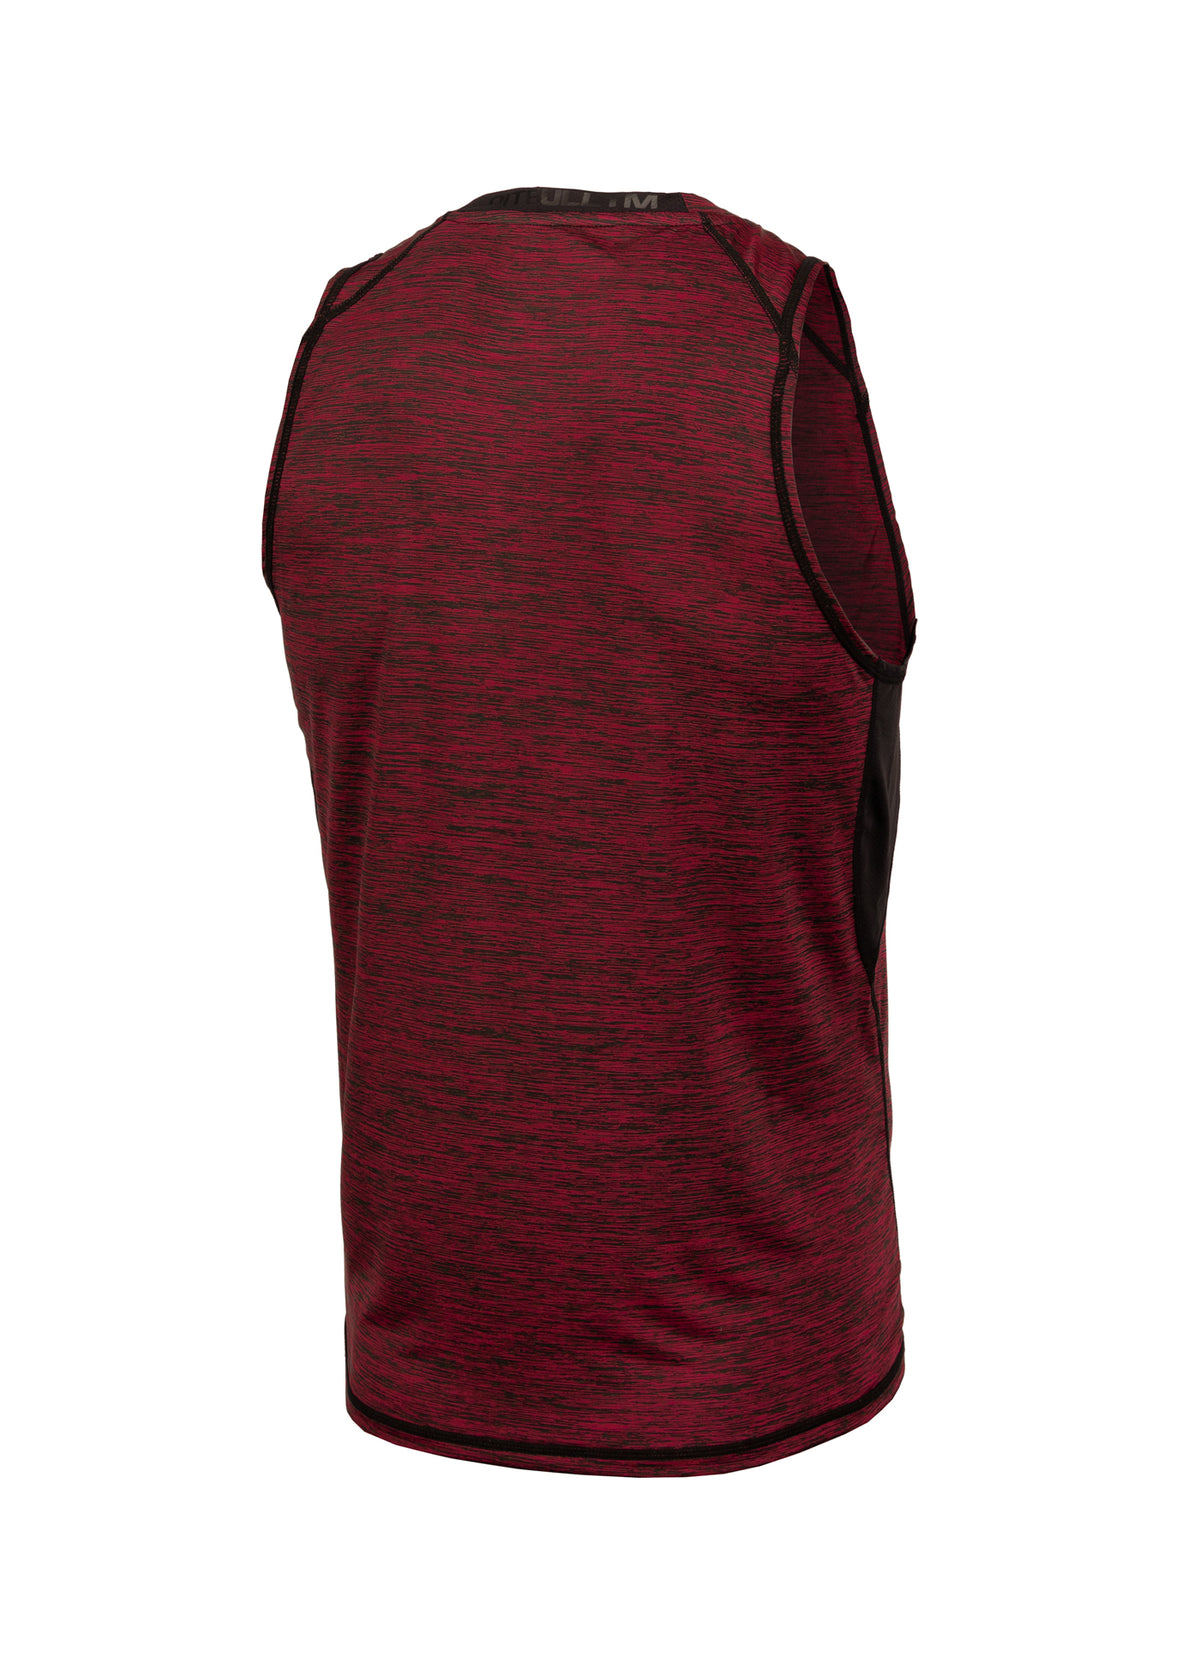 NEW LOGO Performance Red Tank Top